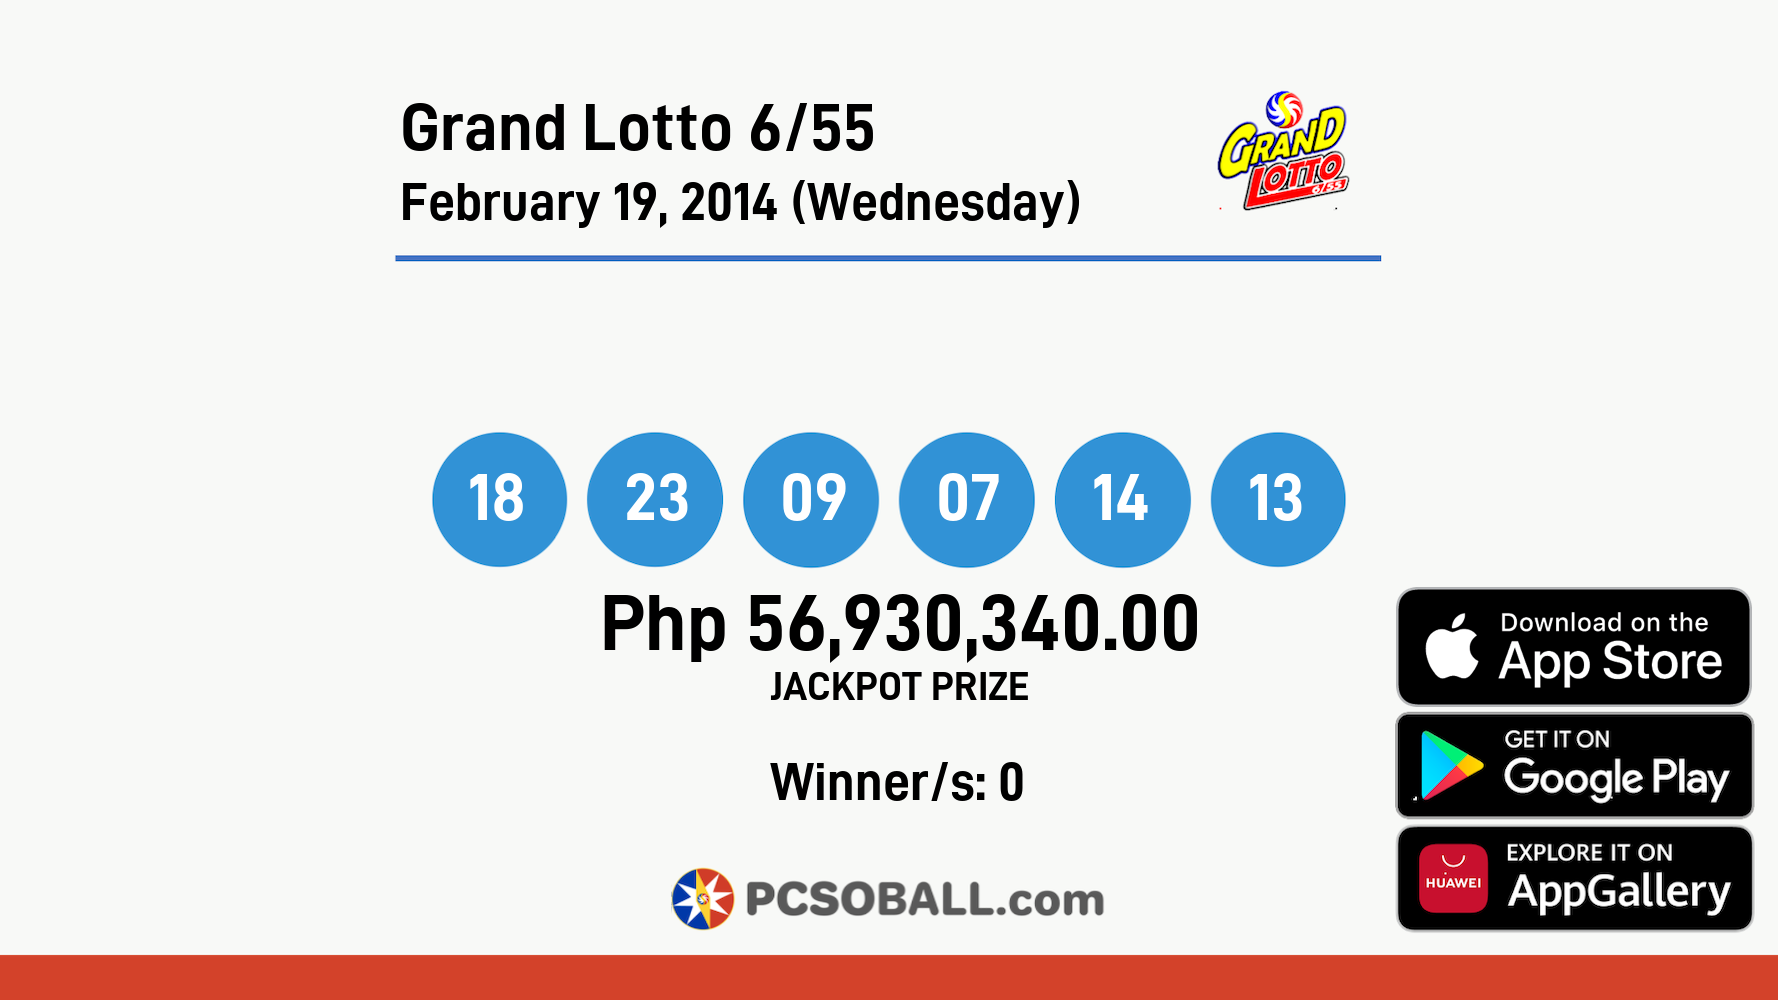 Grand Lotto 6/55 February 19, 2014 (Wednesday) Result